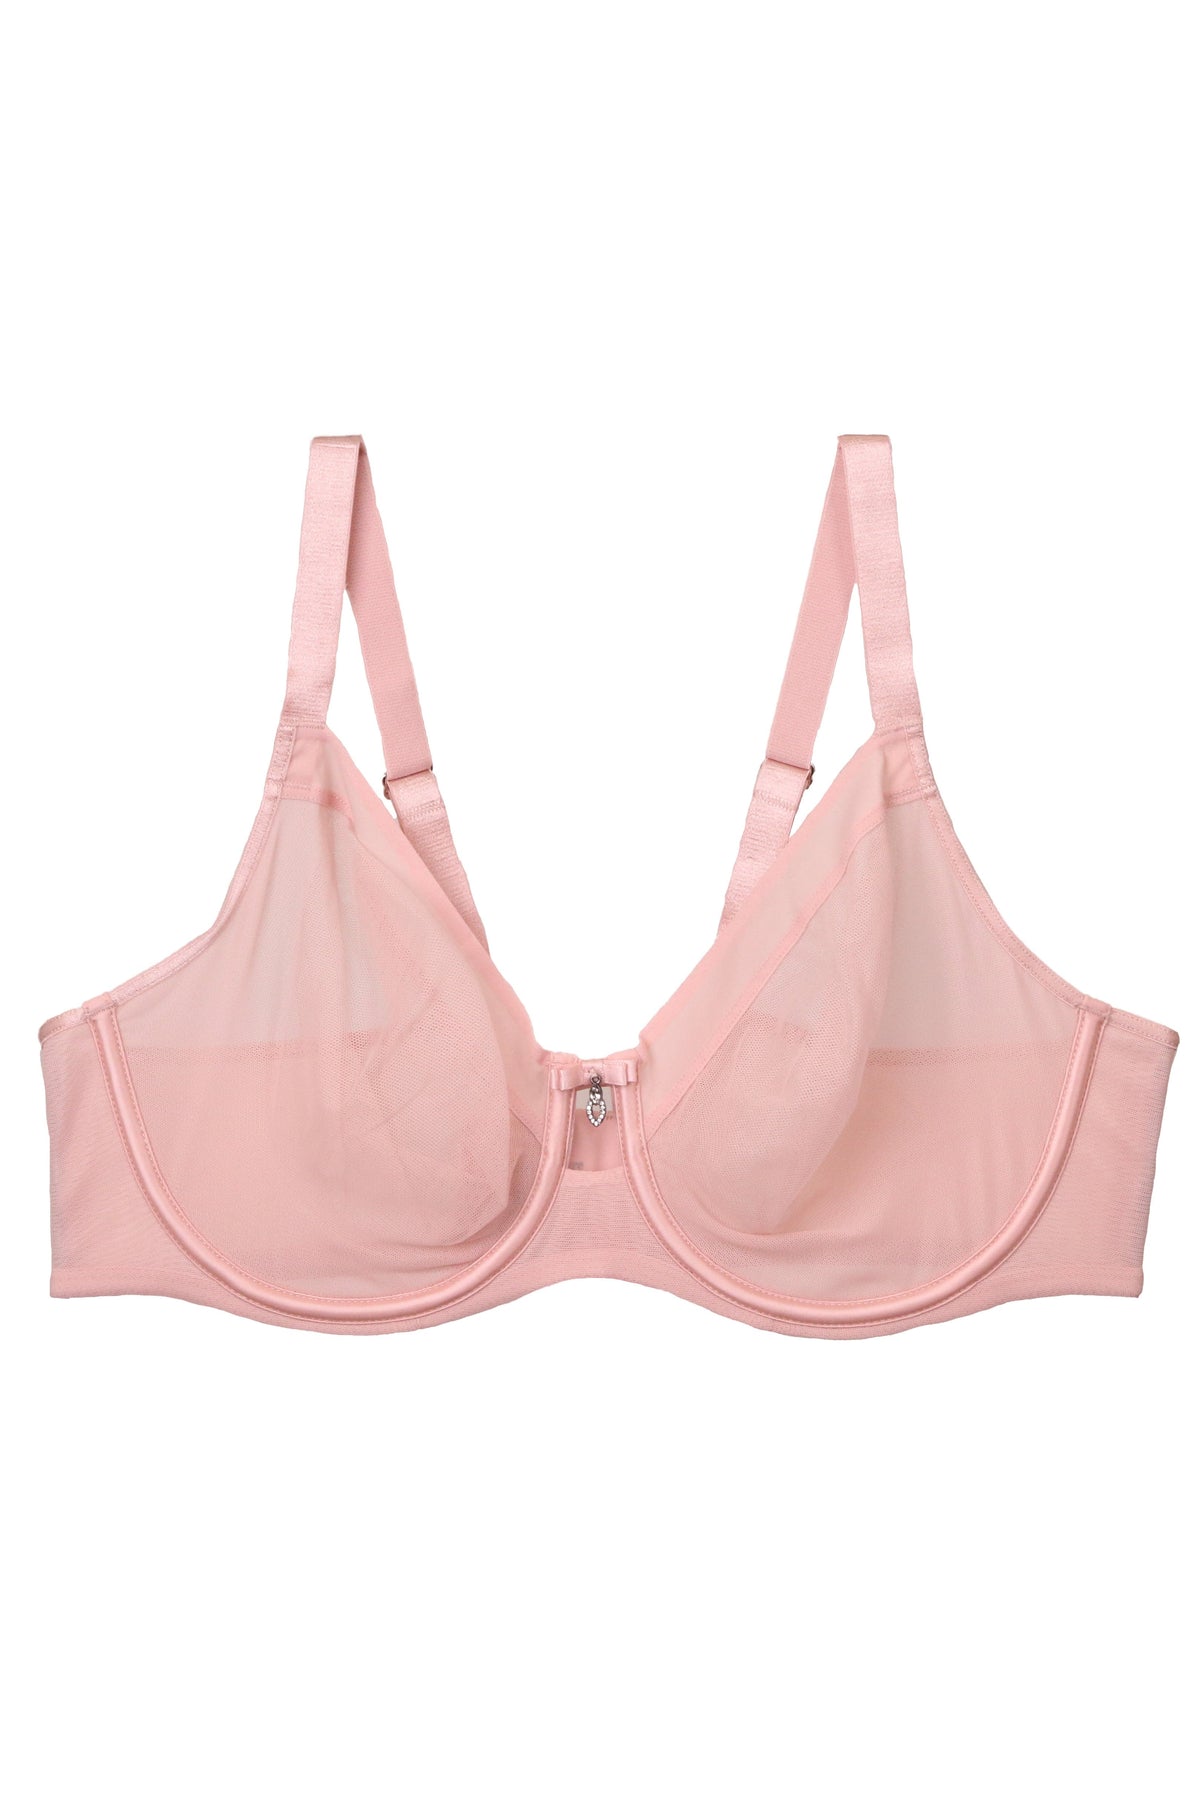 Curvy Couture Plunge Sheer Mesh Unlined Underwire Bra - Blushing Rose